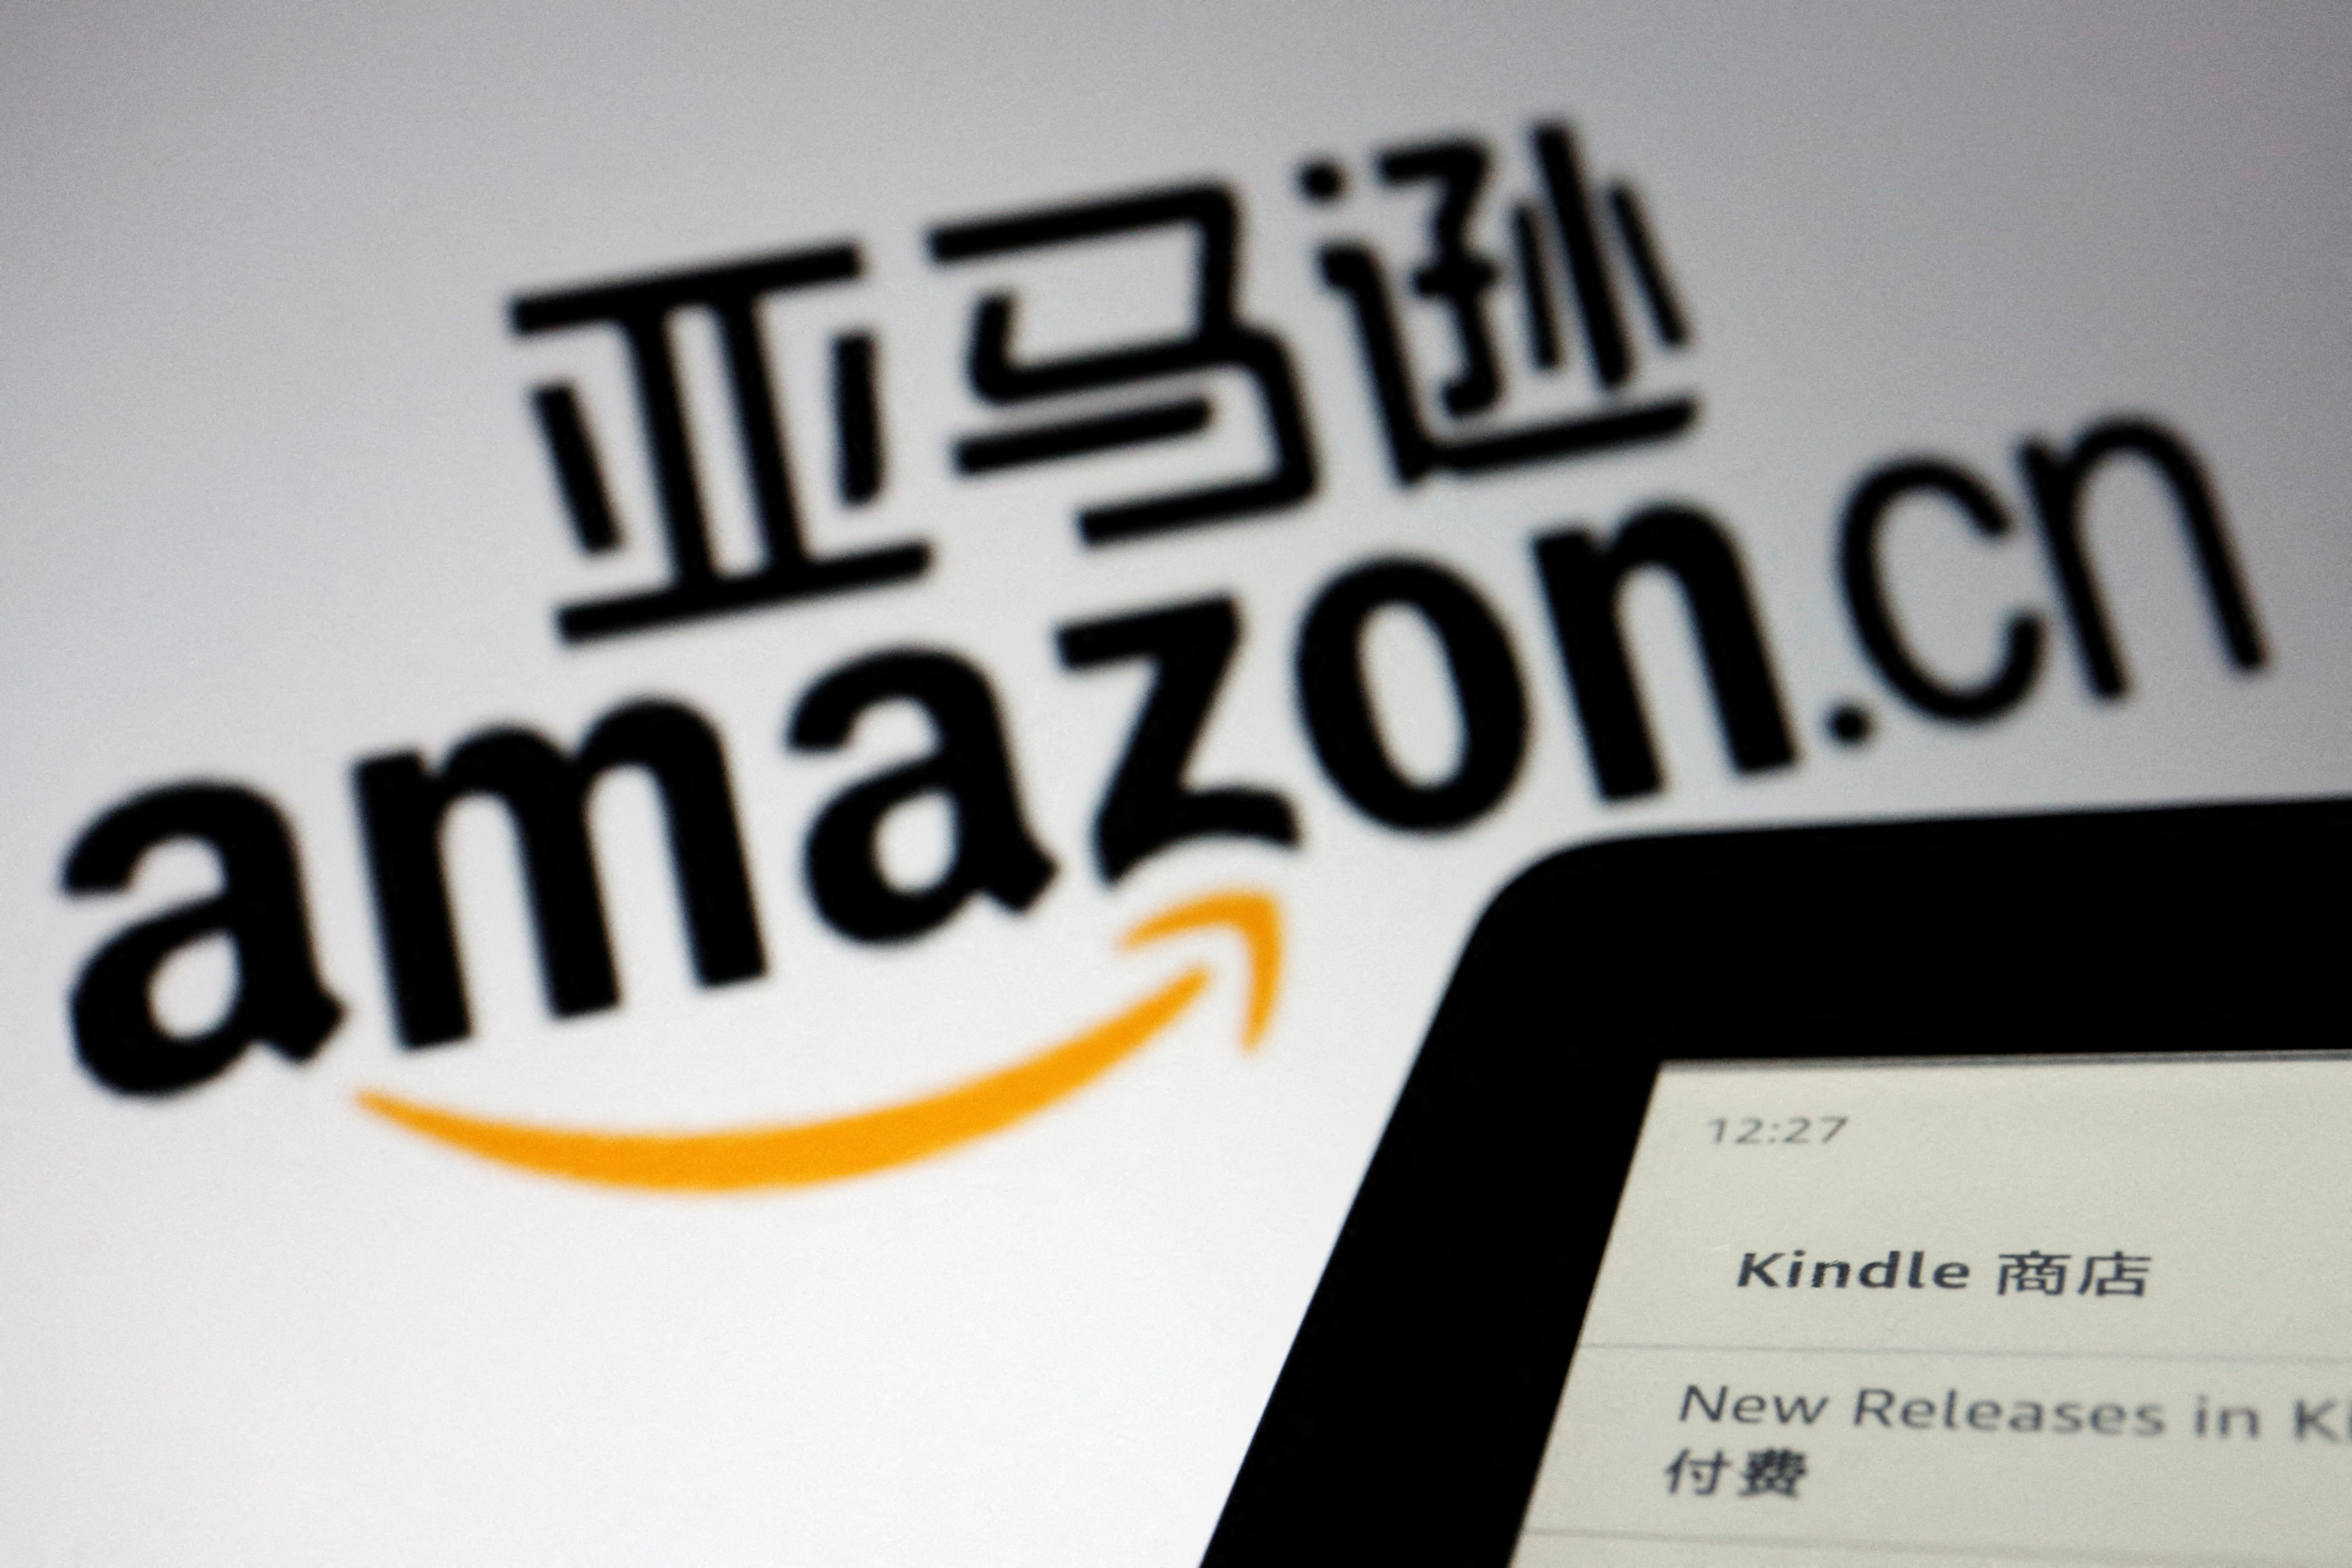 The sign of e-commerce website Amazon China is seen next to a Kindle e-reader displayed in this illustration